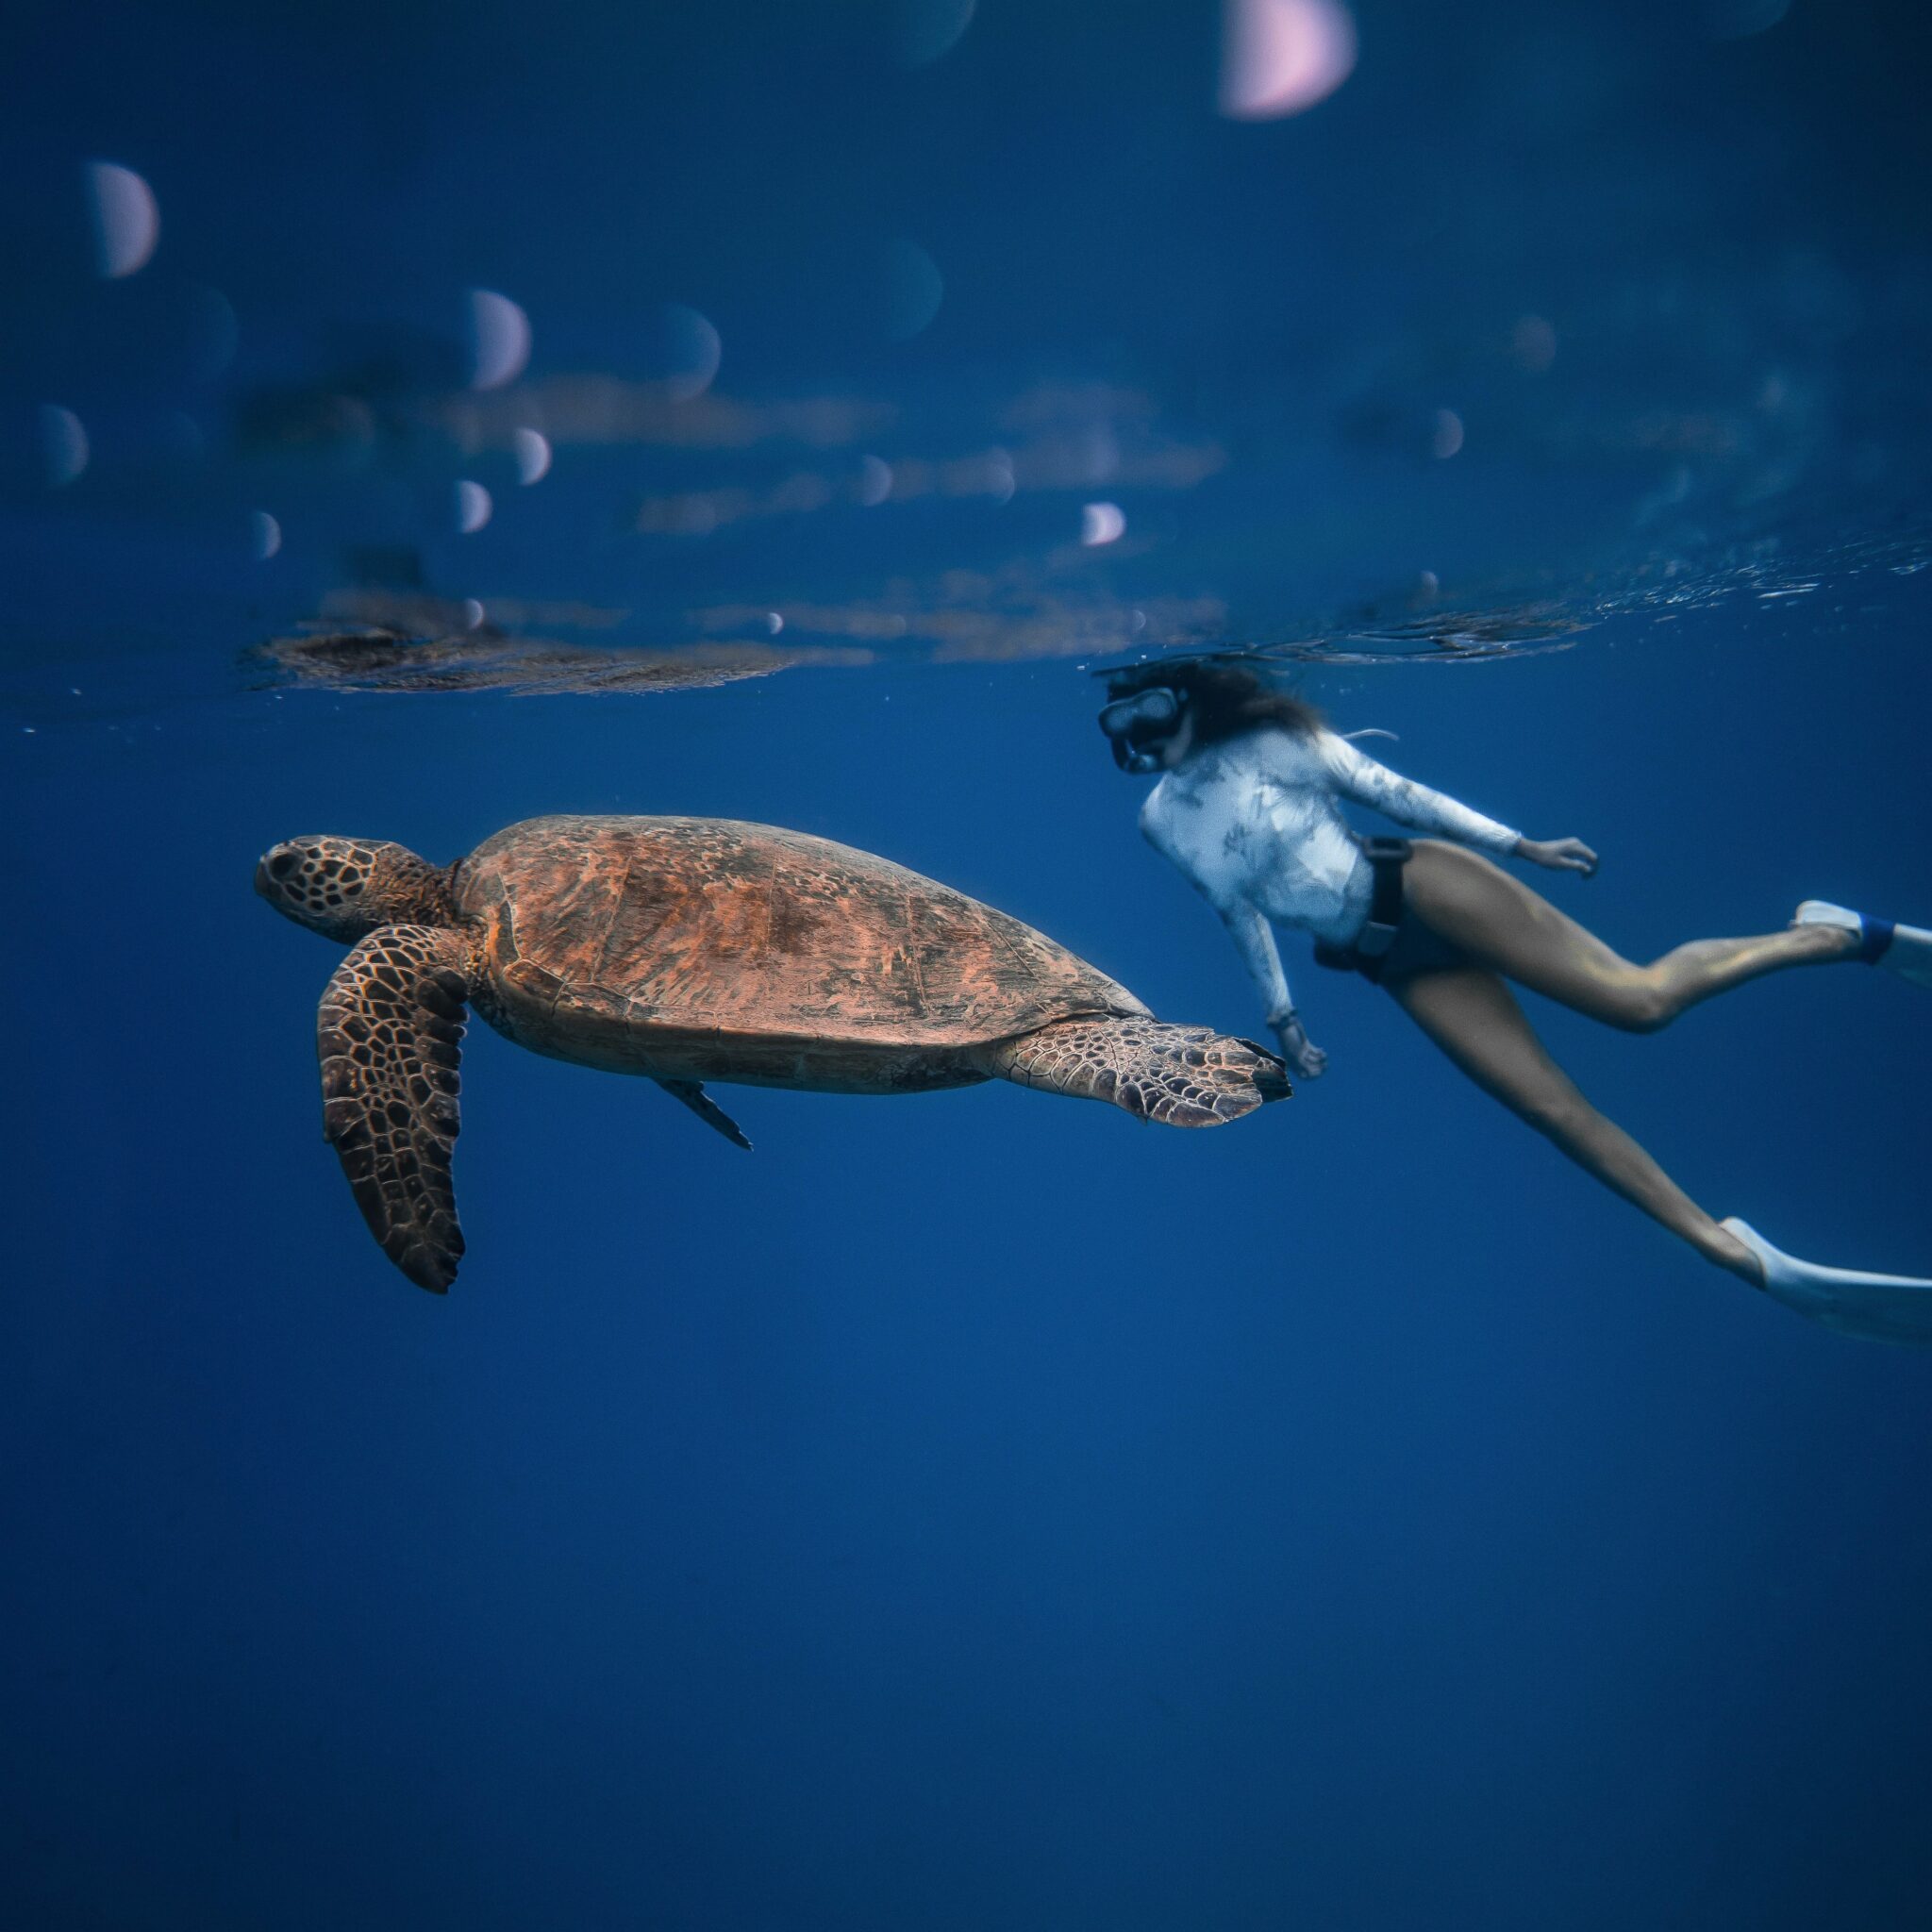 Turtle and freediver - Pexels (Stock image) 